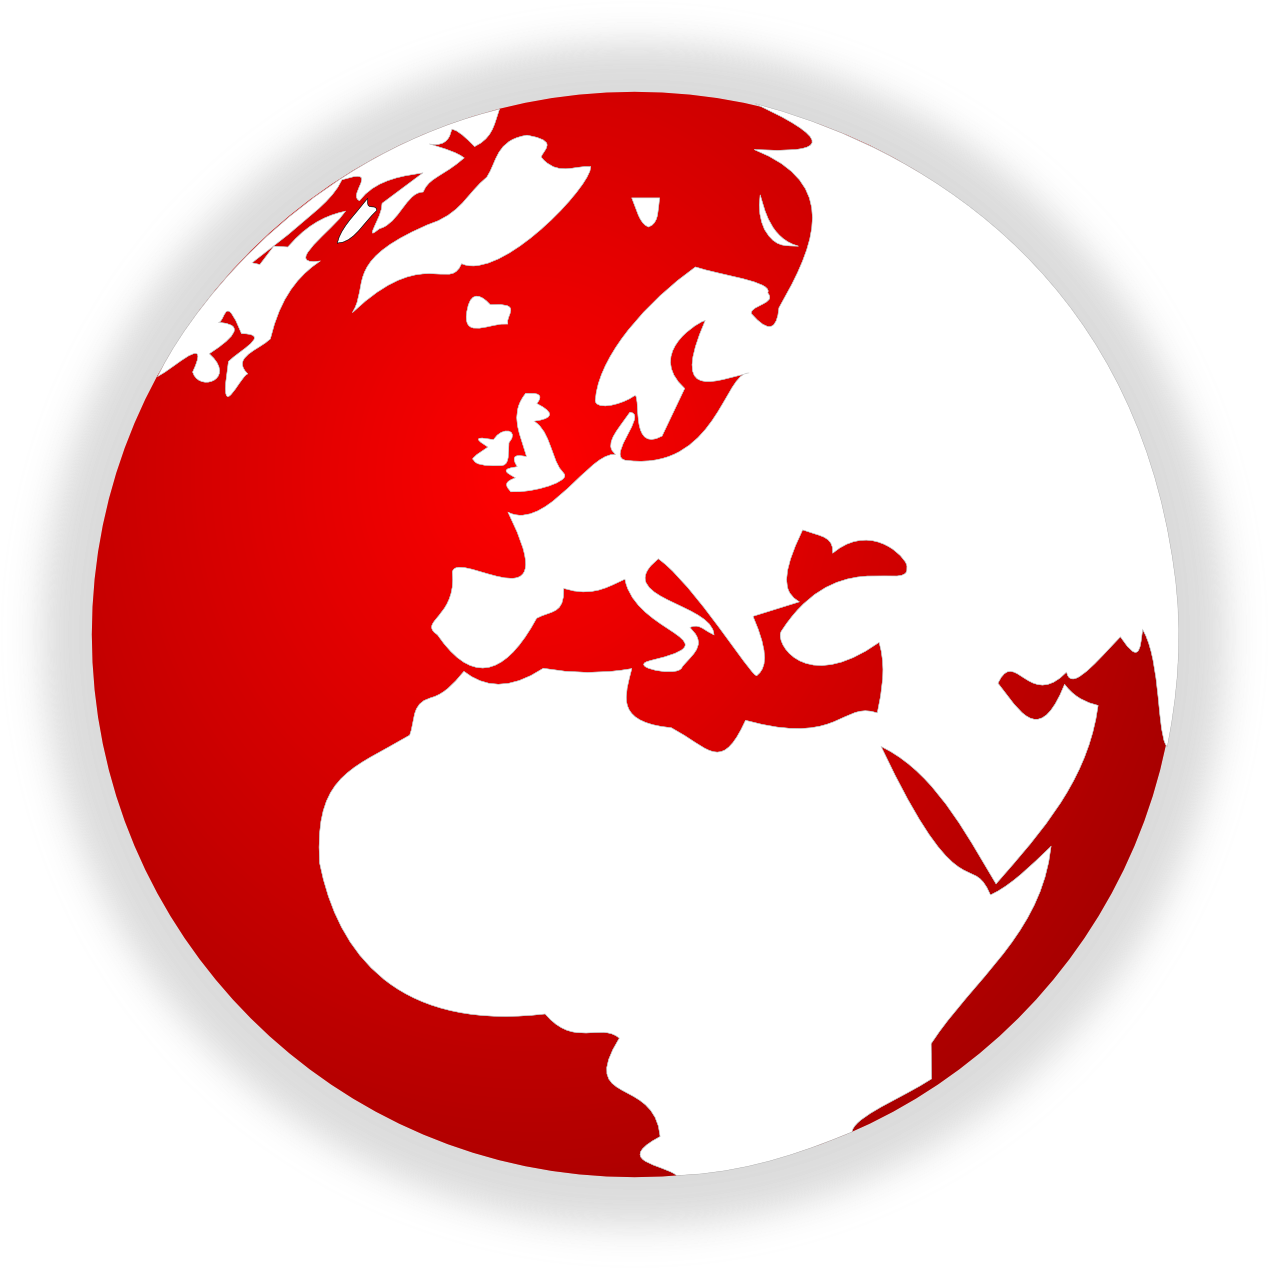 Red World   Free Images At Clker Com   Vector Clip Art Online Royalty